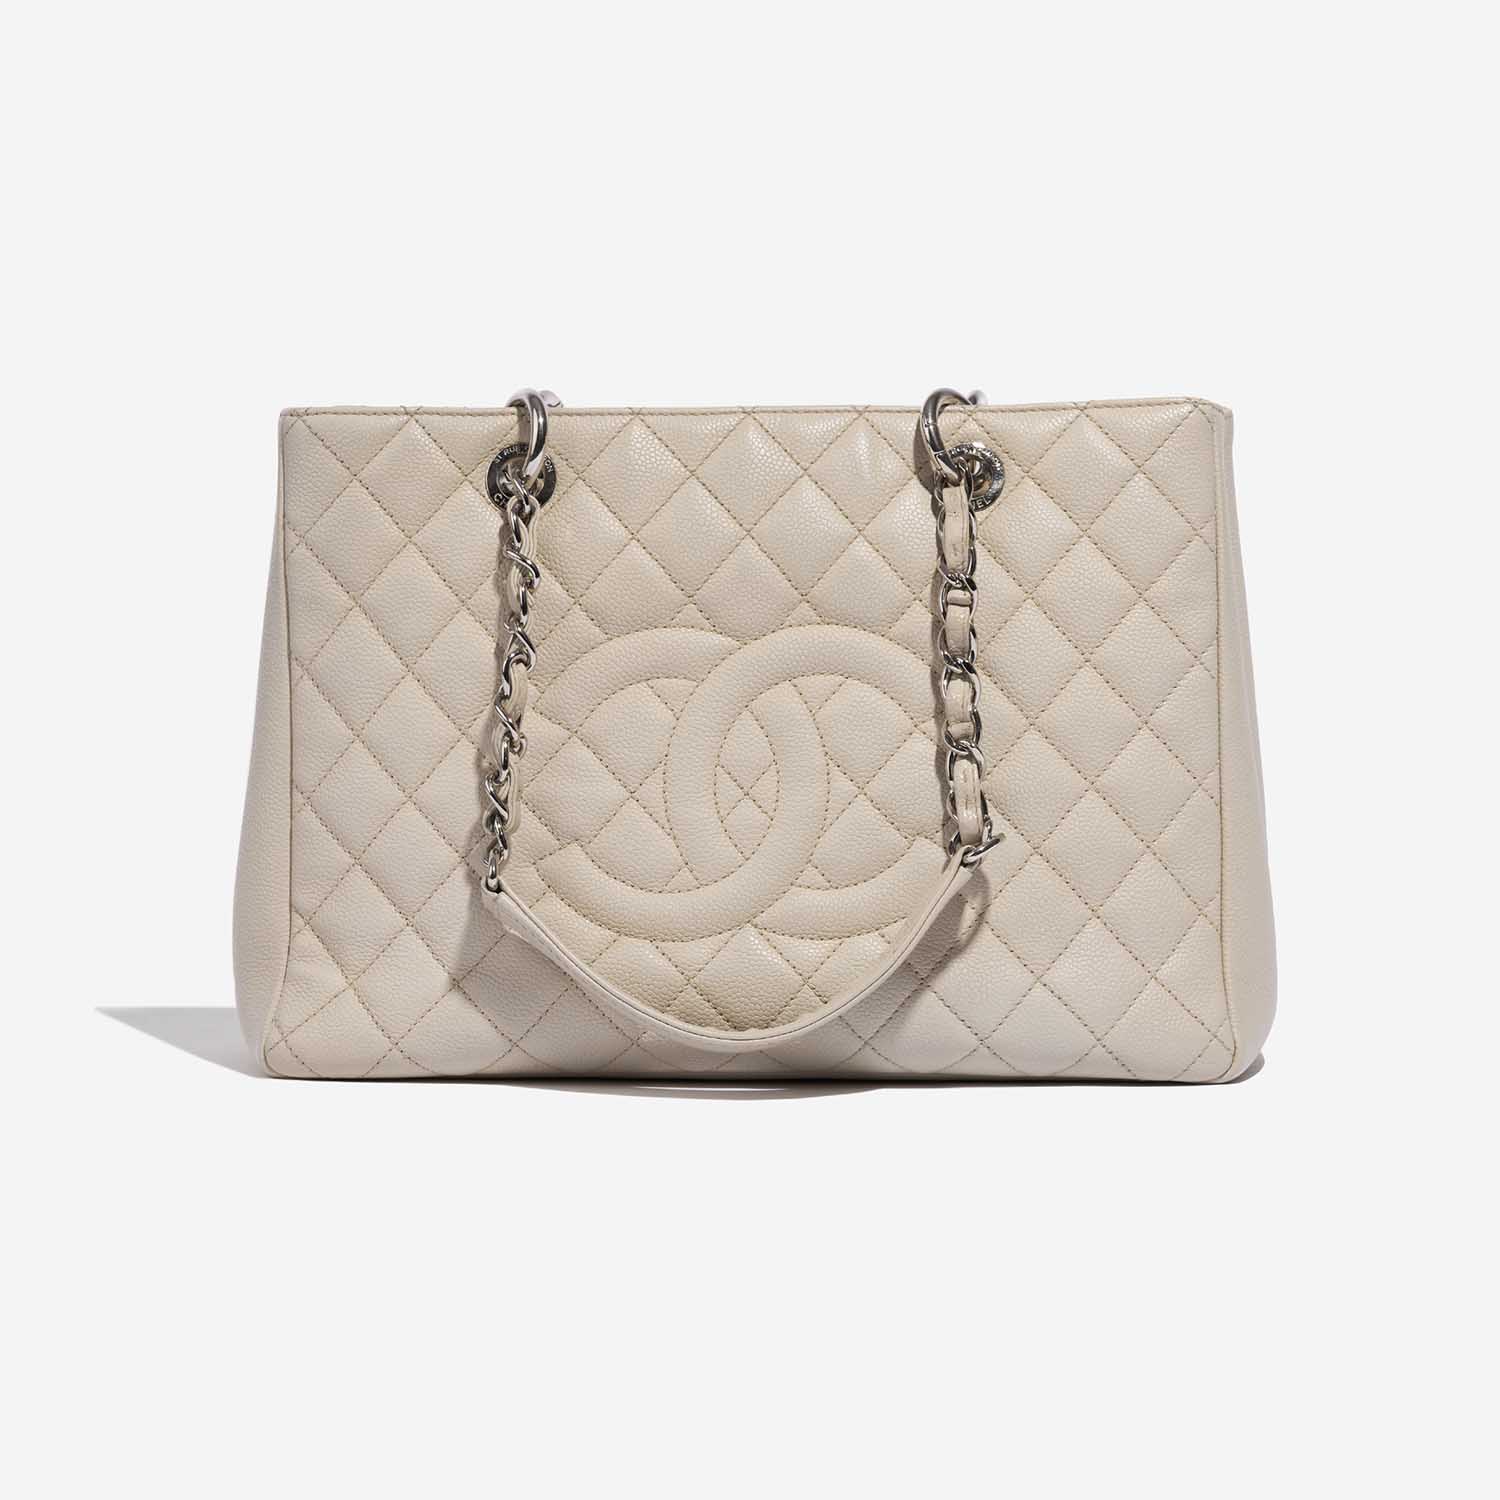 Chanel Handbag Images Browse 785 Stock Photos  Vectors Free Download with  Trial  Shutterstock